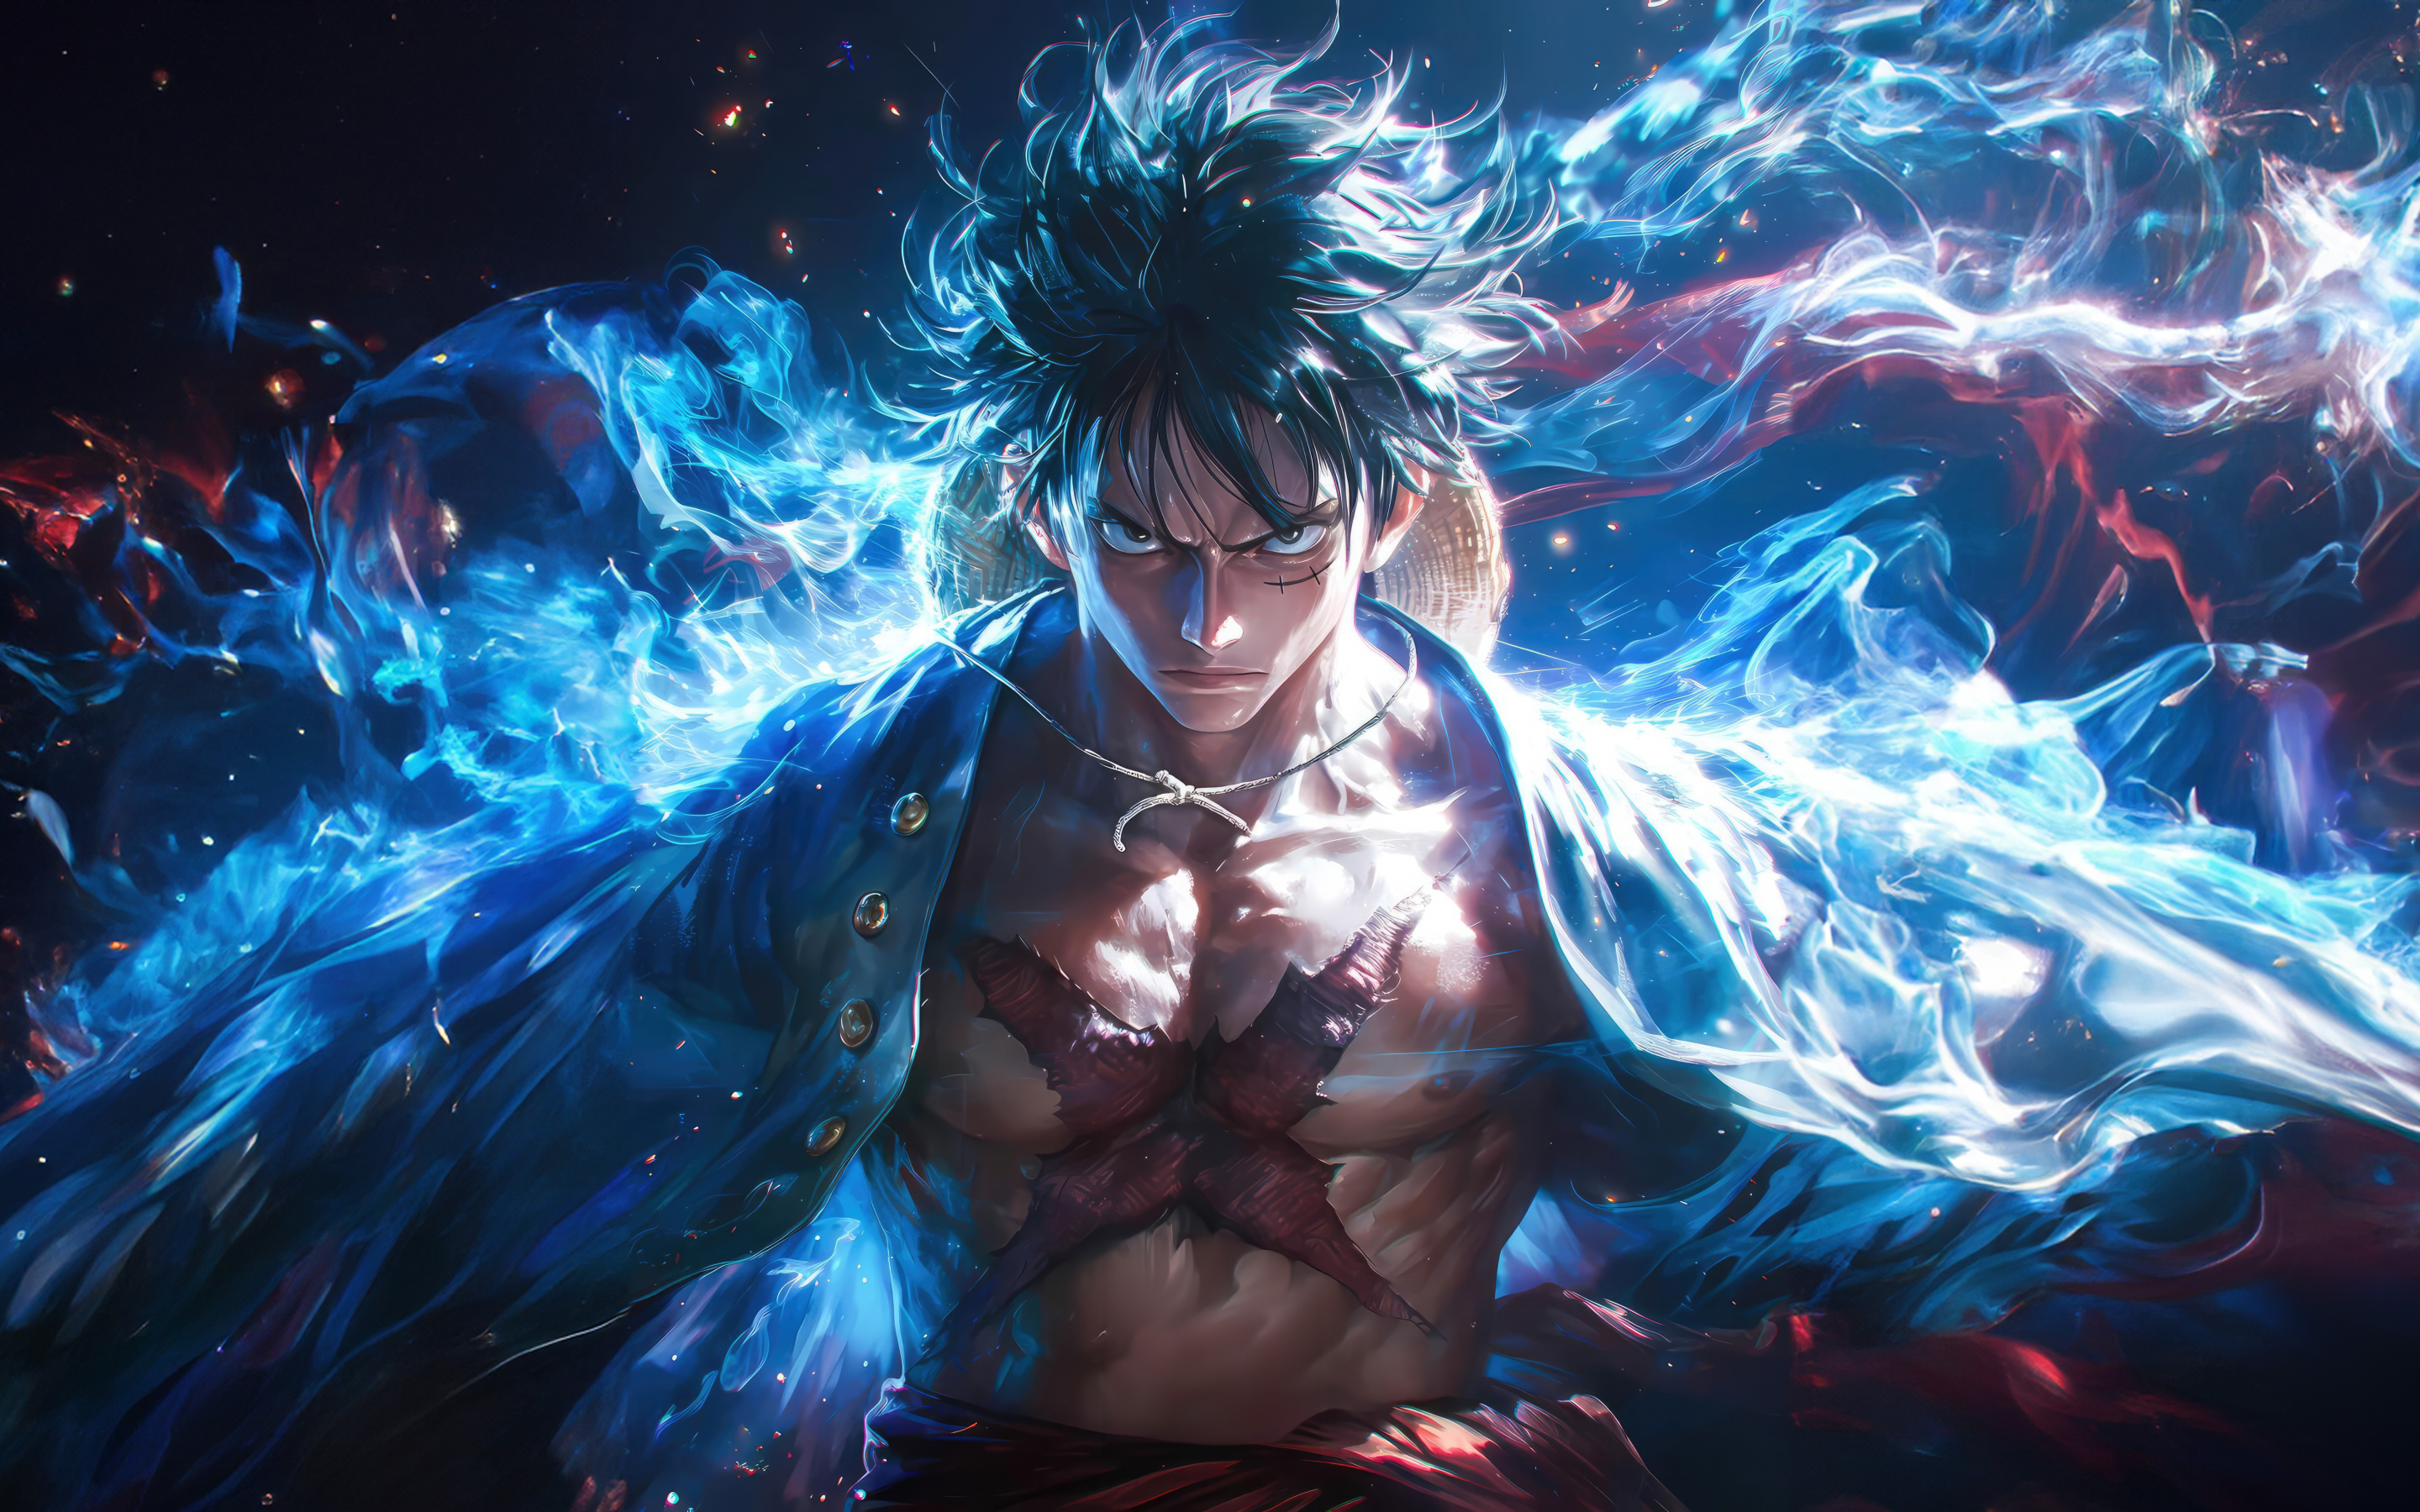 Angry Monkey D. Luffy, legacy pirate anime, art, 2880x1800 wallpaper